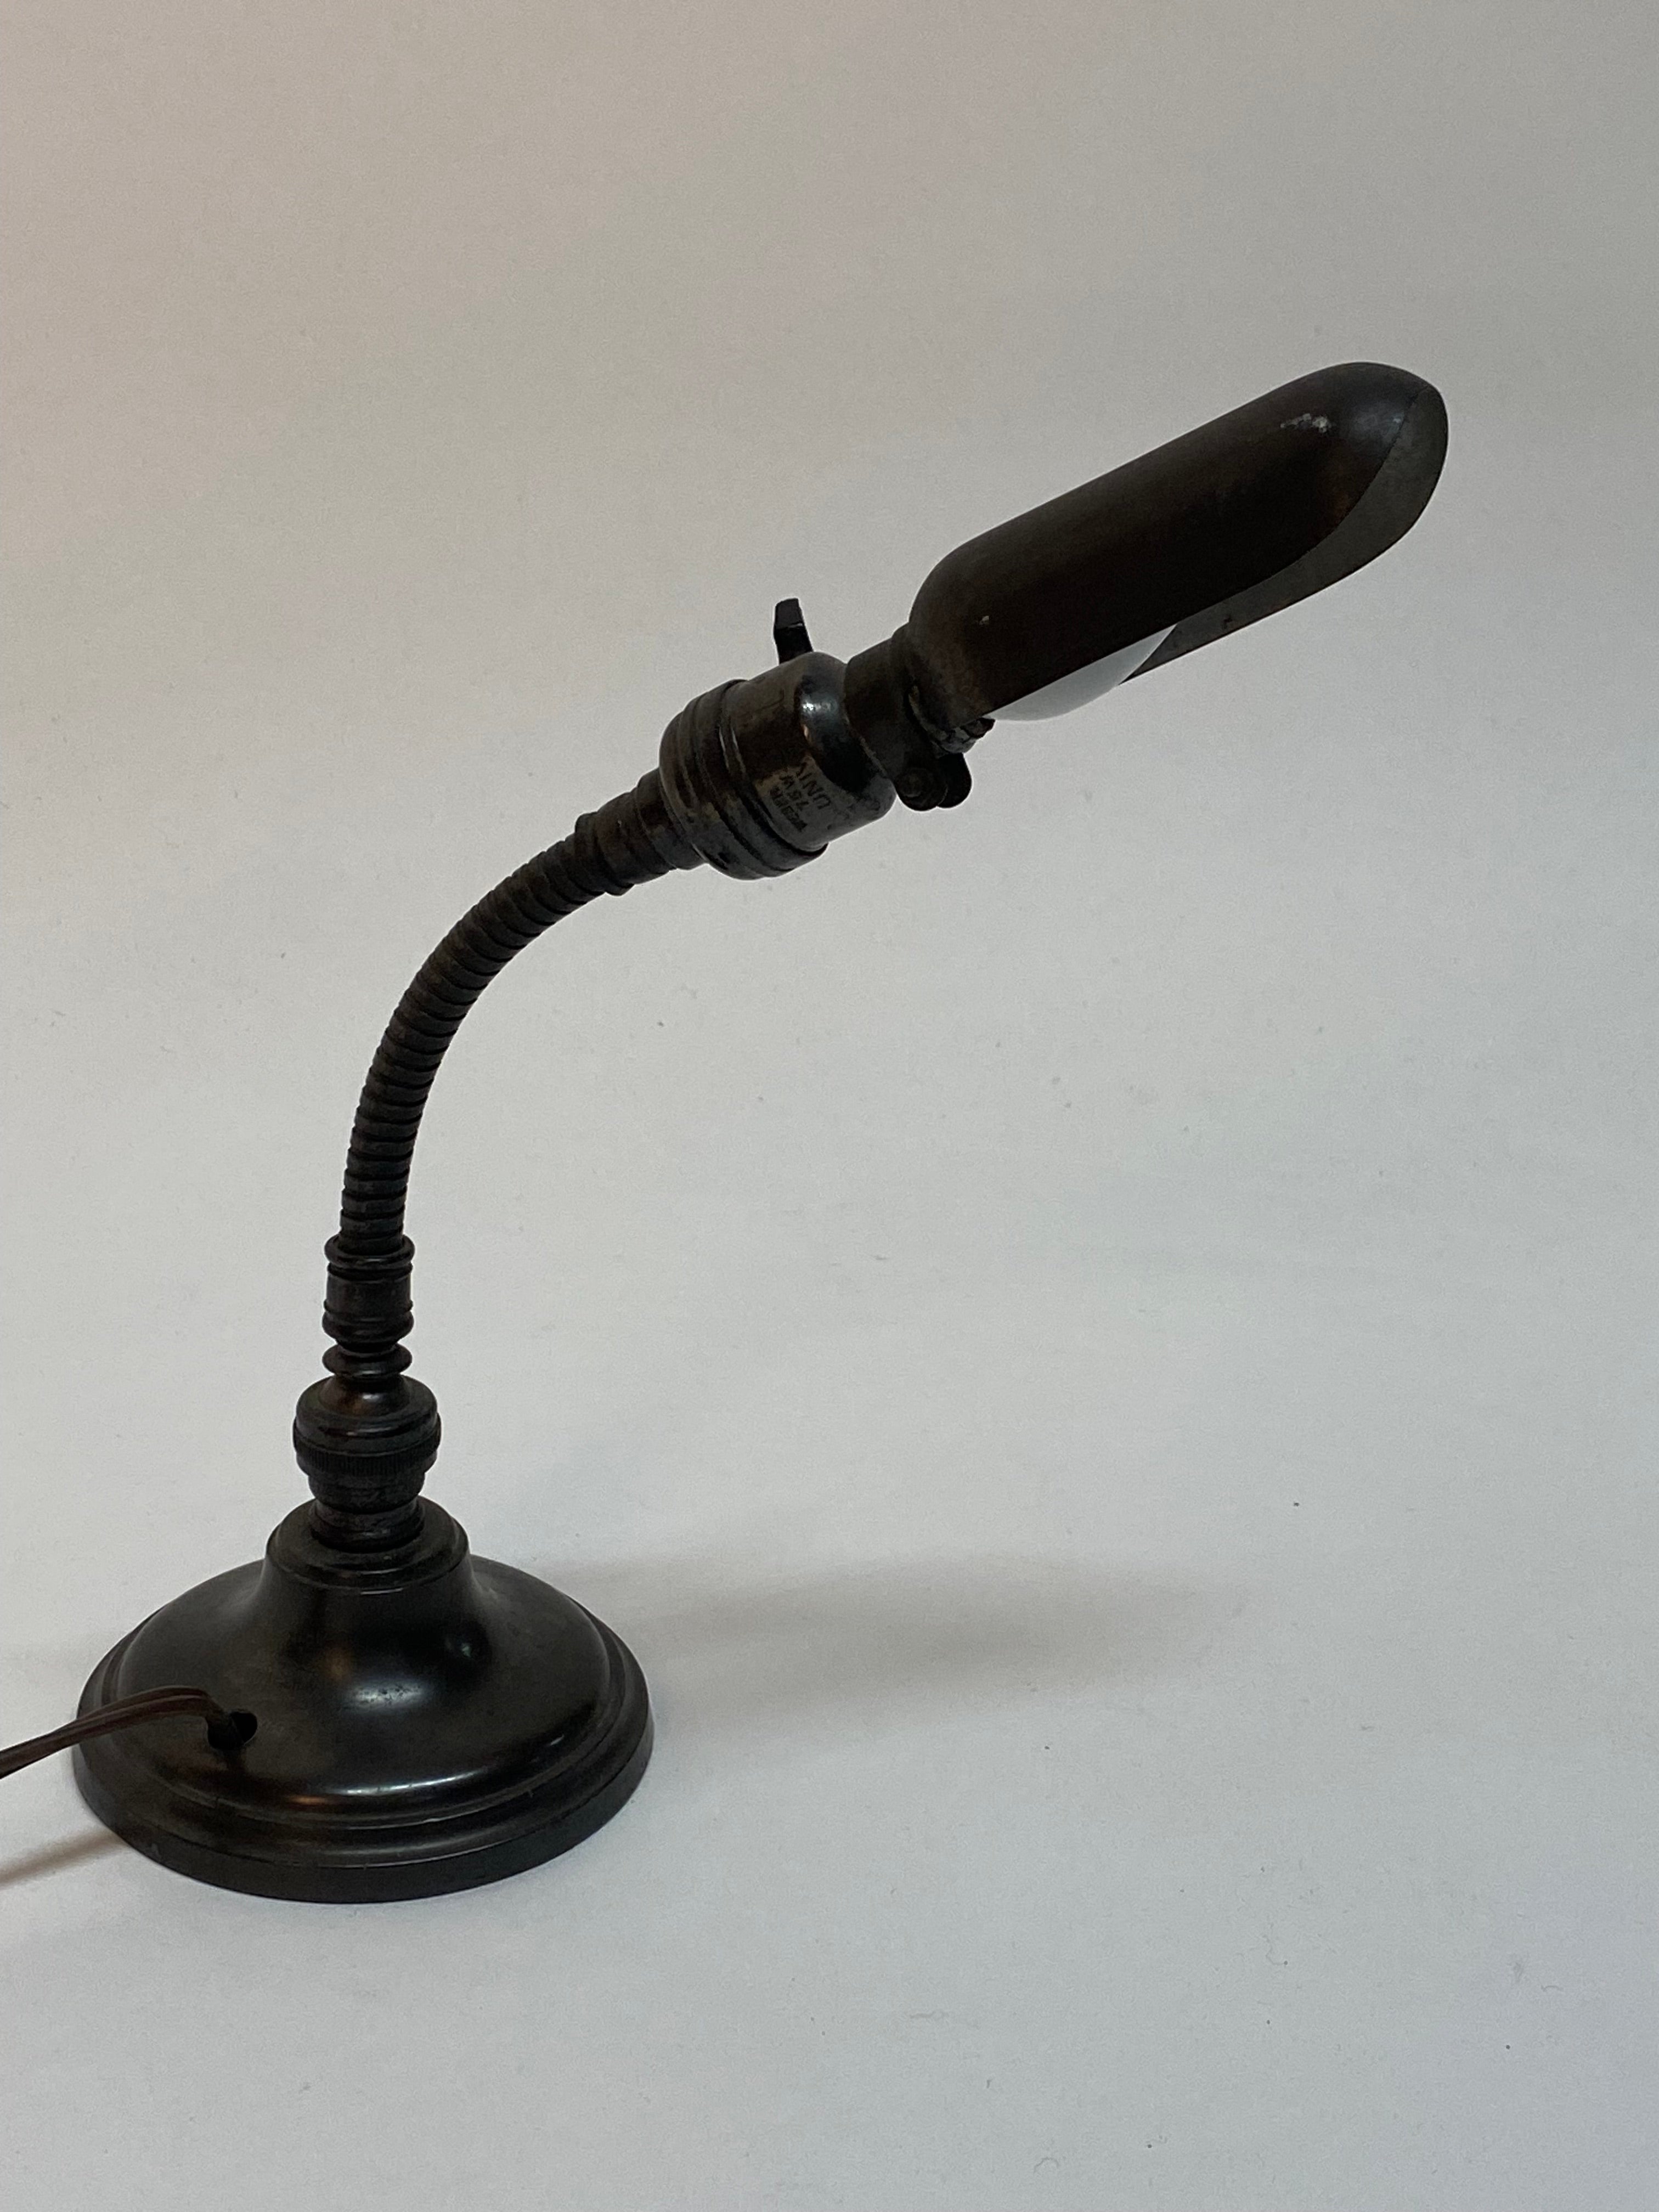 A great little lamp that will brightly light up the smallest of areas. Hubbell style mini work light with a round weighted base and adjustable gooseneck. Circa 1920-30. Good working condition with wear consistent with age and use. Minor cosmetic